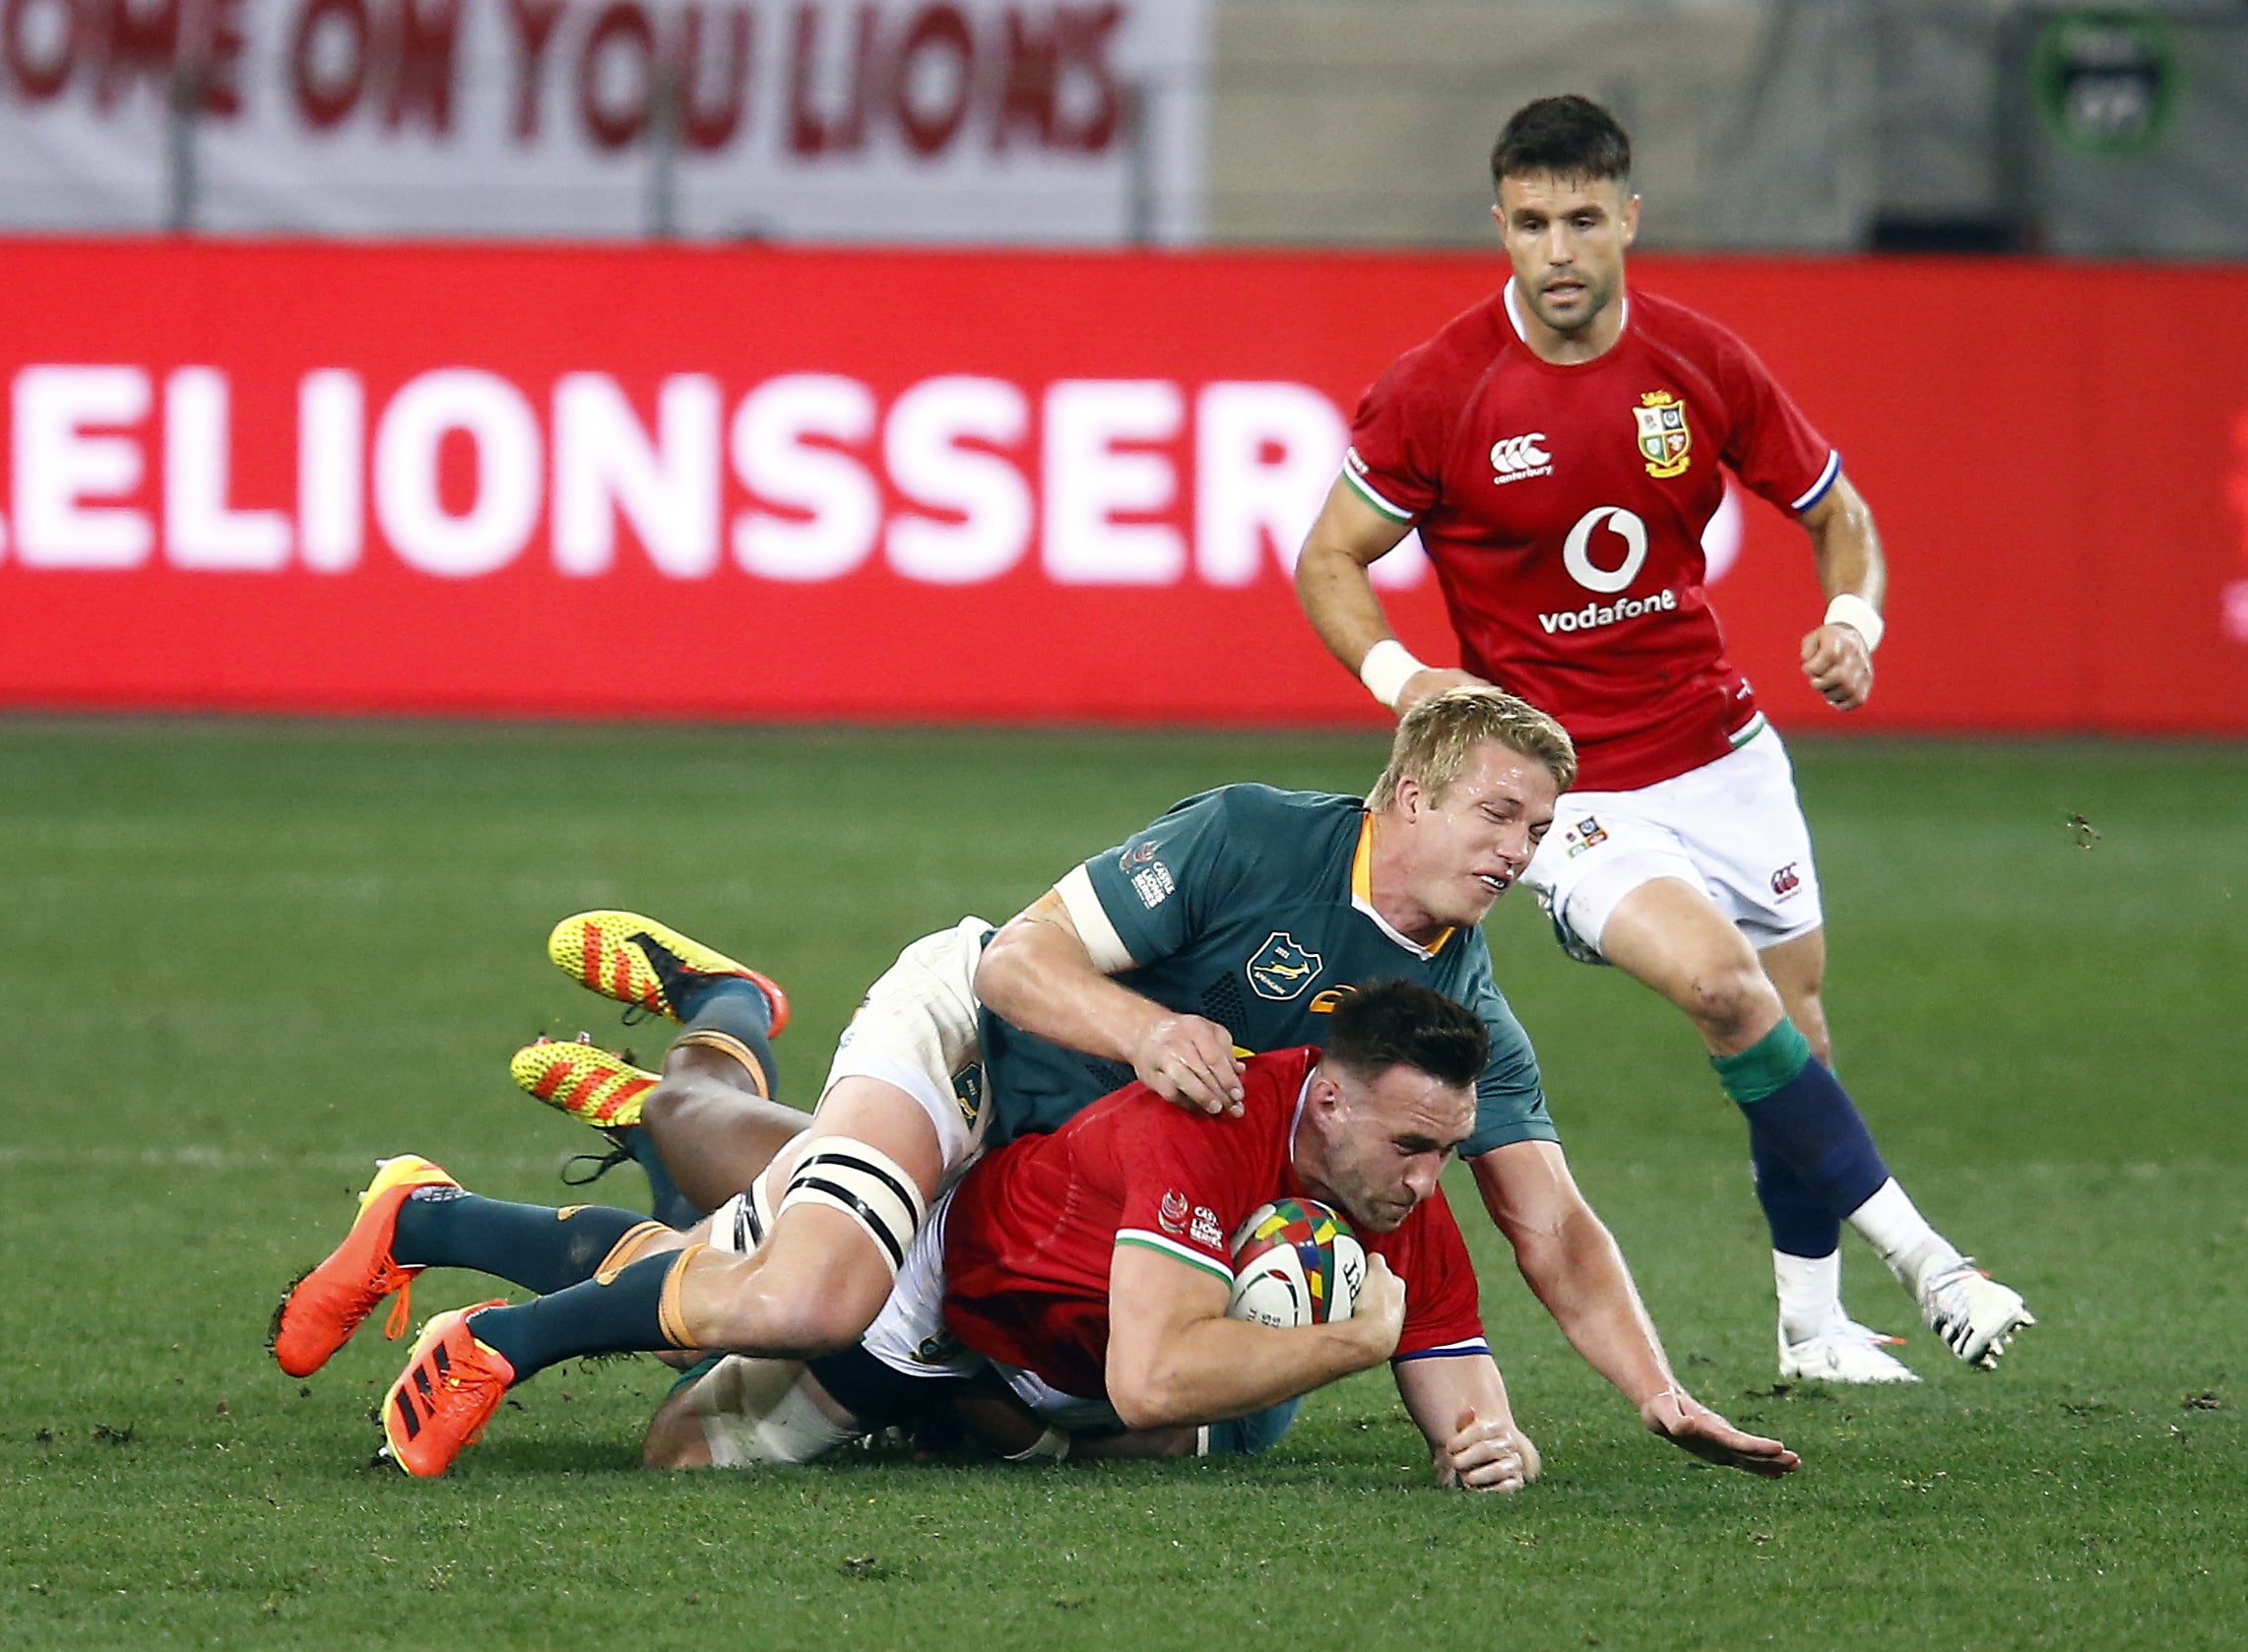 South Africa flanker Pieter-Steph du Toit has been ruled out of the third Test by a shoulder injury (Steve Haag/PA)